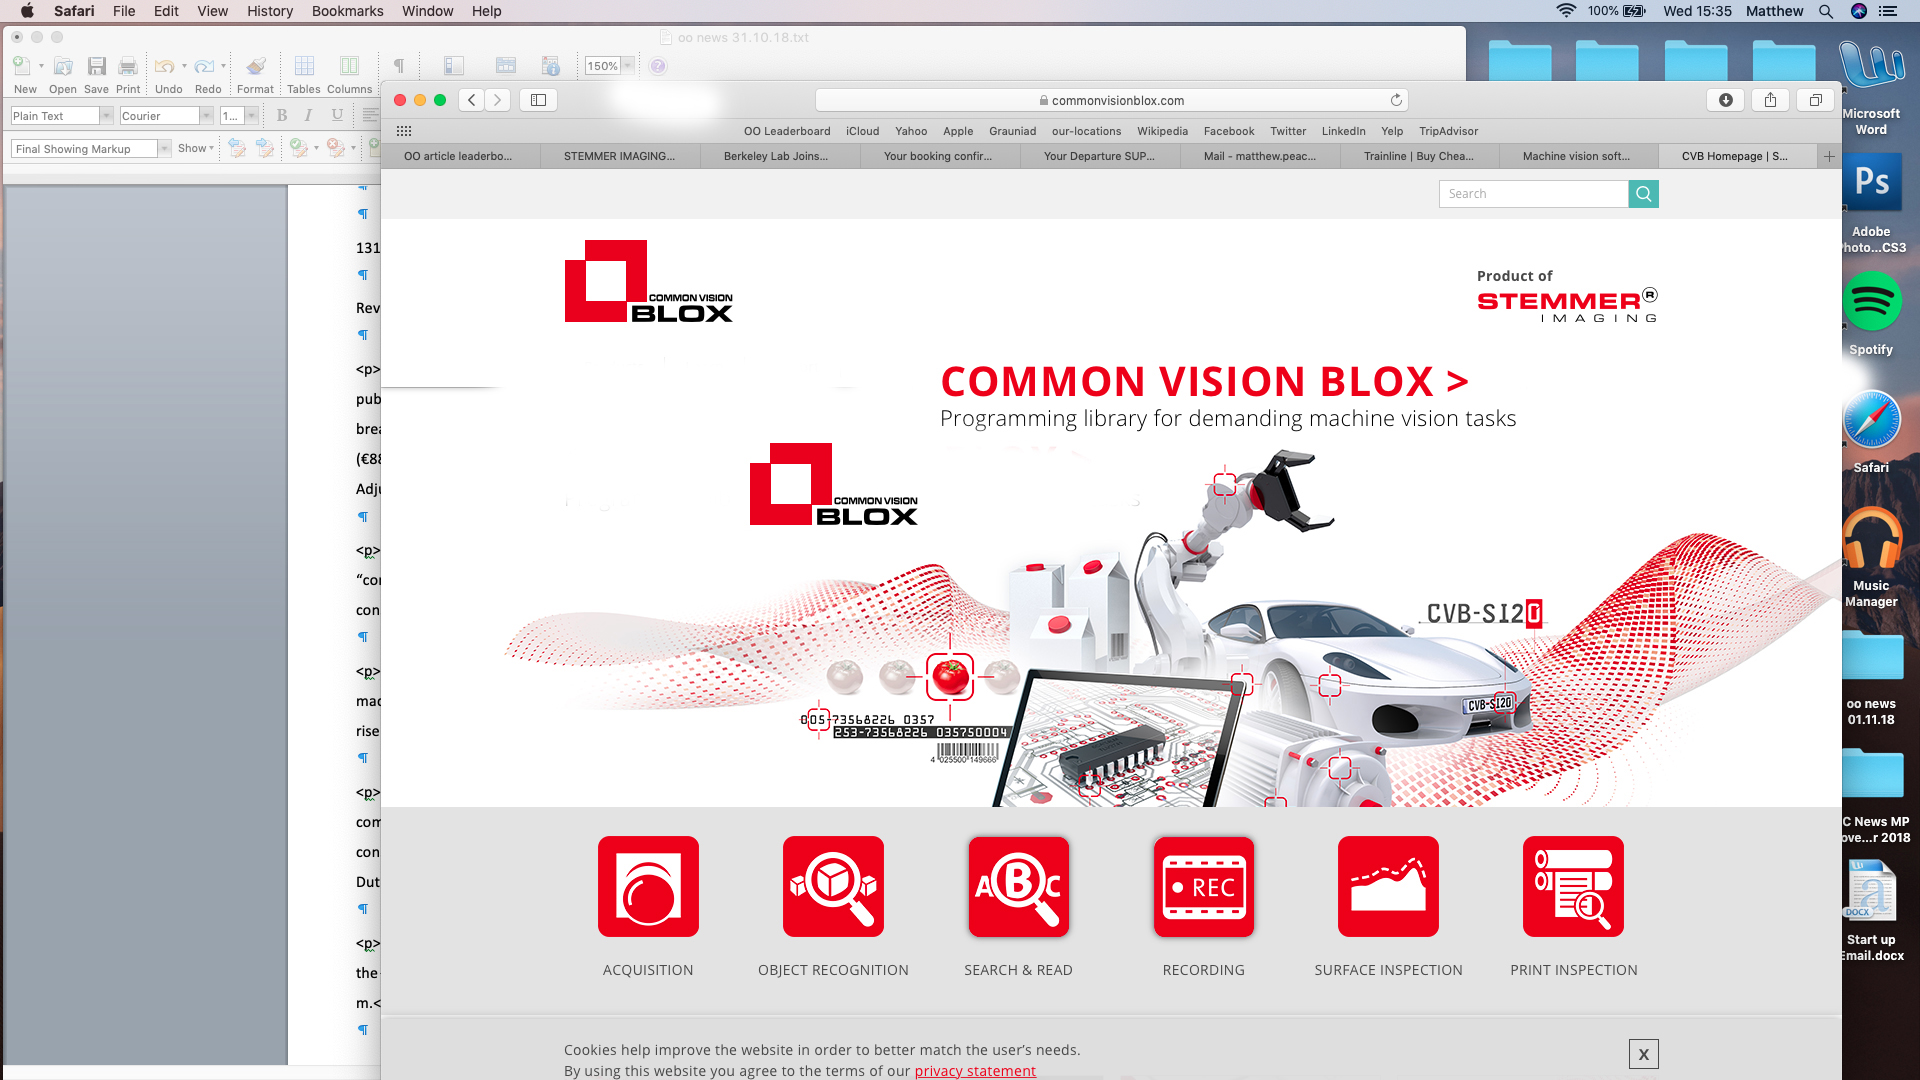 Stemmer’s Common Vision Blox software has also seen rising demand.